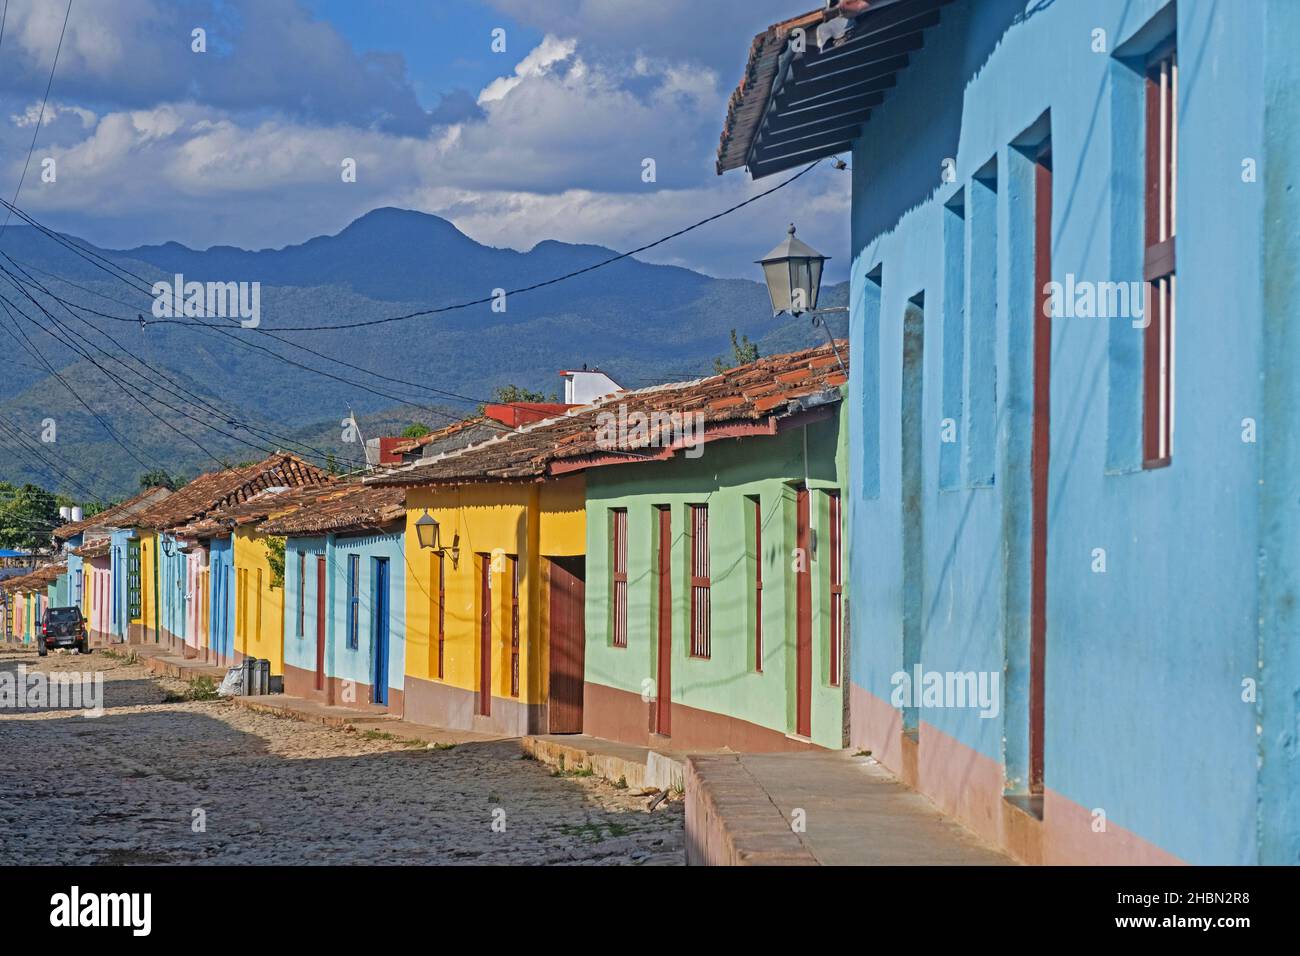 Colonial cobbled street with pastel coloured houses in the city Trinidad, Sancti Spíritus Province on the island Cuba, Caribbean Stock Photo